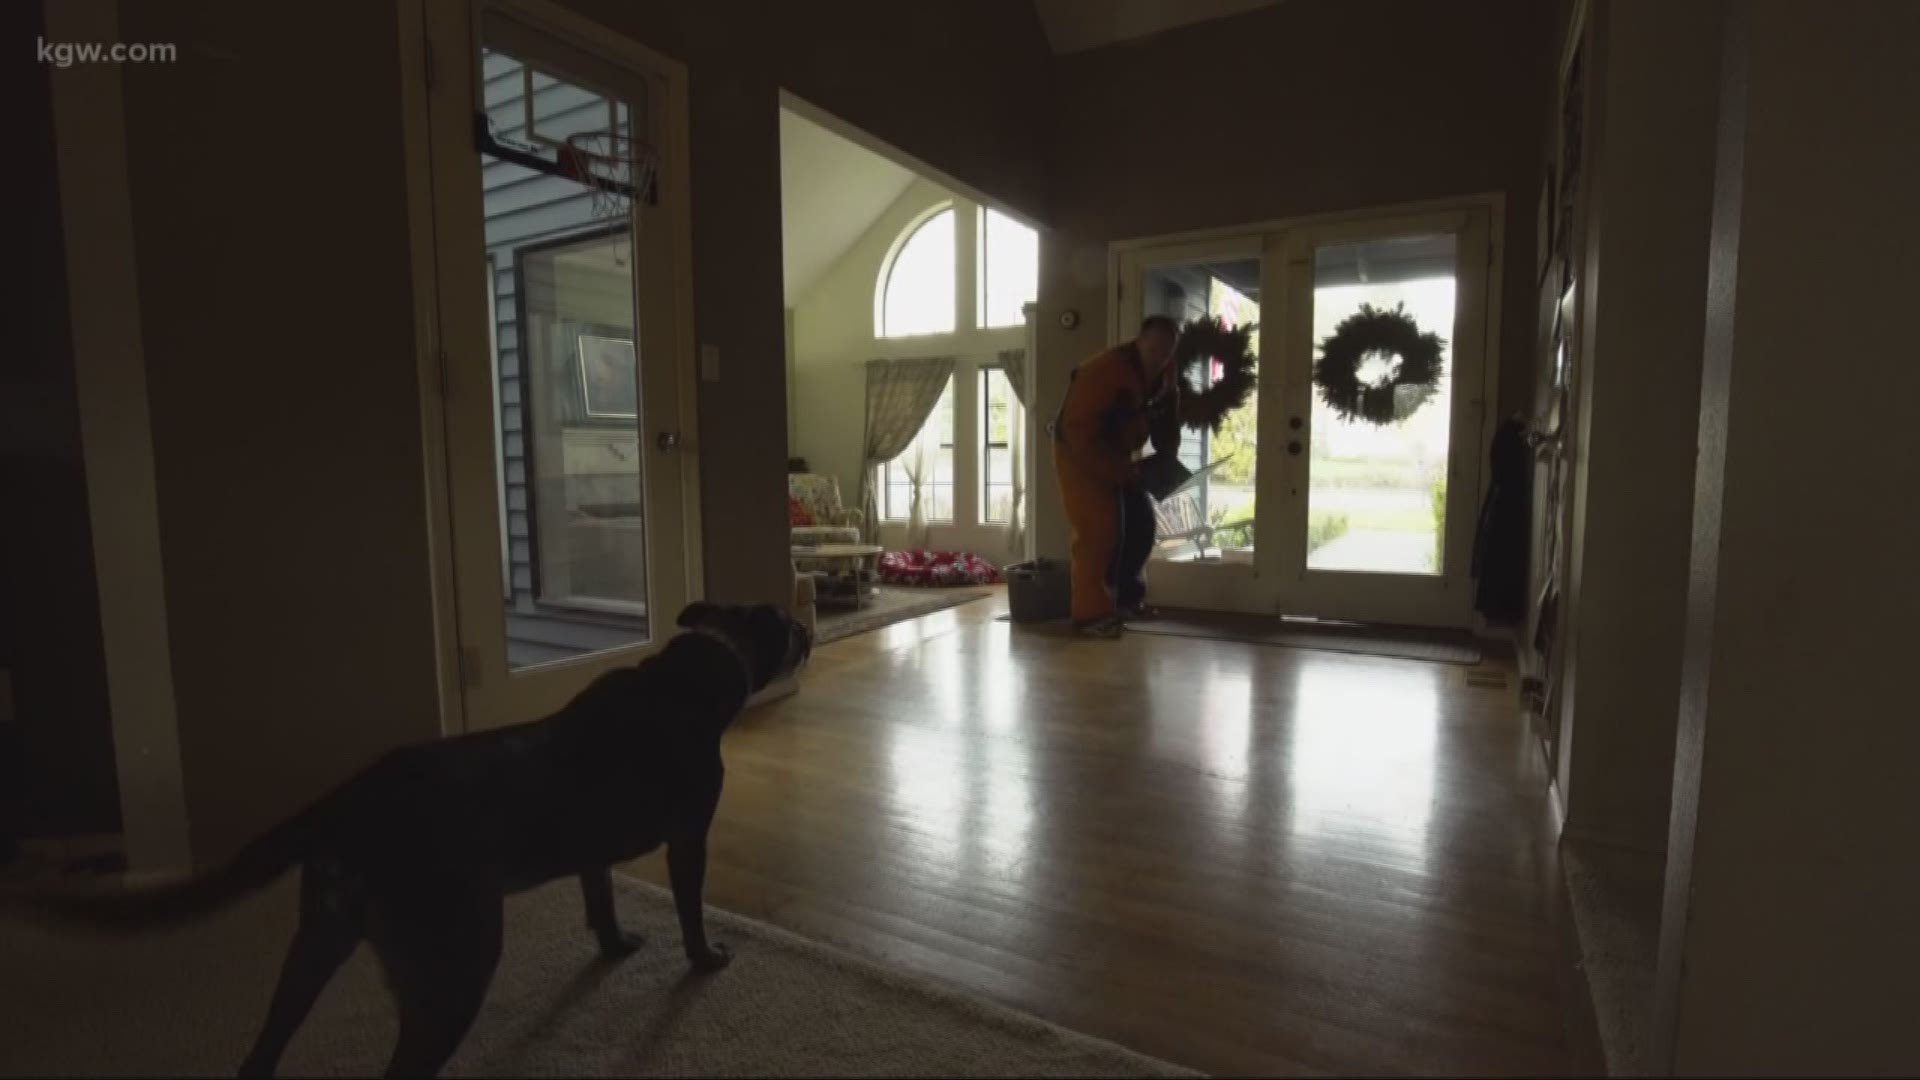 Ever wonder how your dog would respond if a burglar tried to break into your home? To find out, we put three dogs to the test.